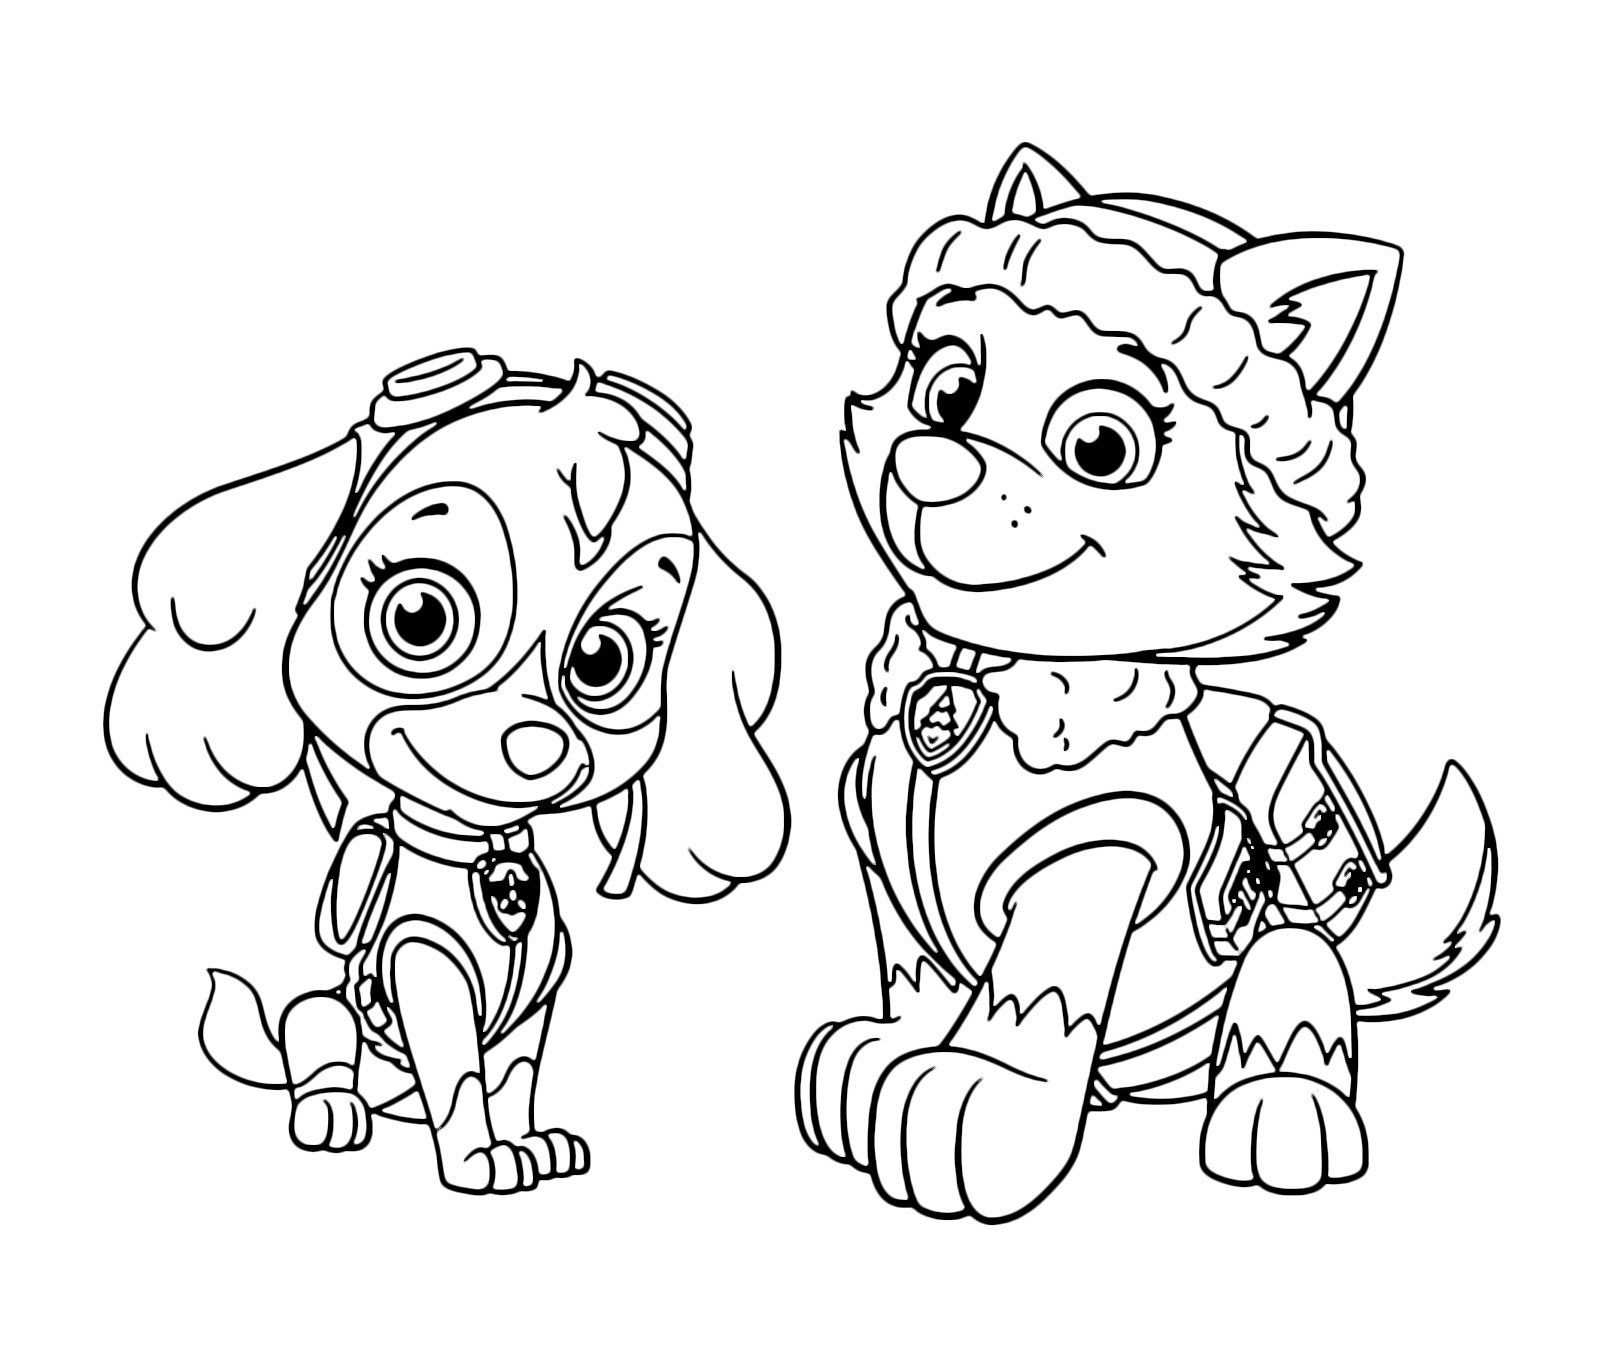 Zuma Coloring Pages New Paw Patrol Rocky Skye And Page Inside Free